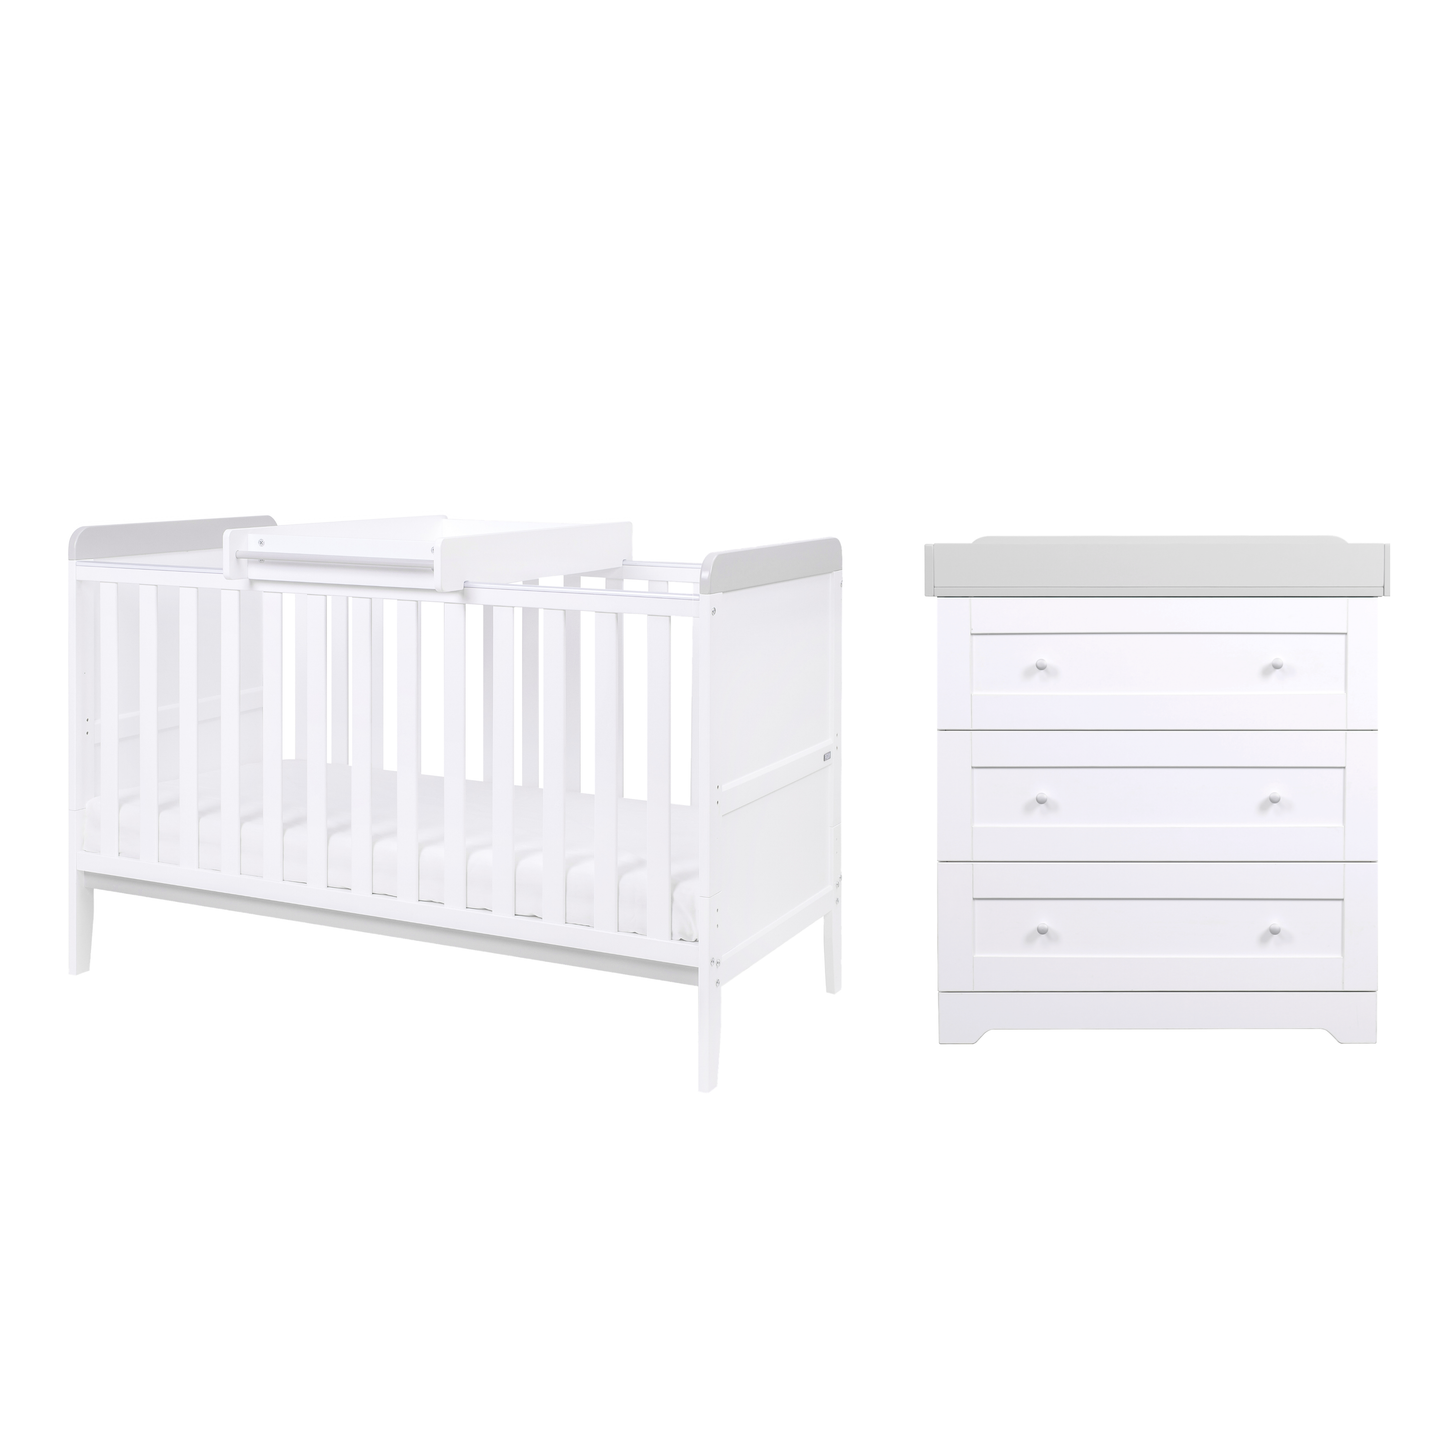 Tutti Bambini Rio 2 Piece Set with Cot Bed and Dresser Changer